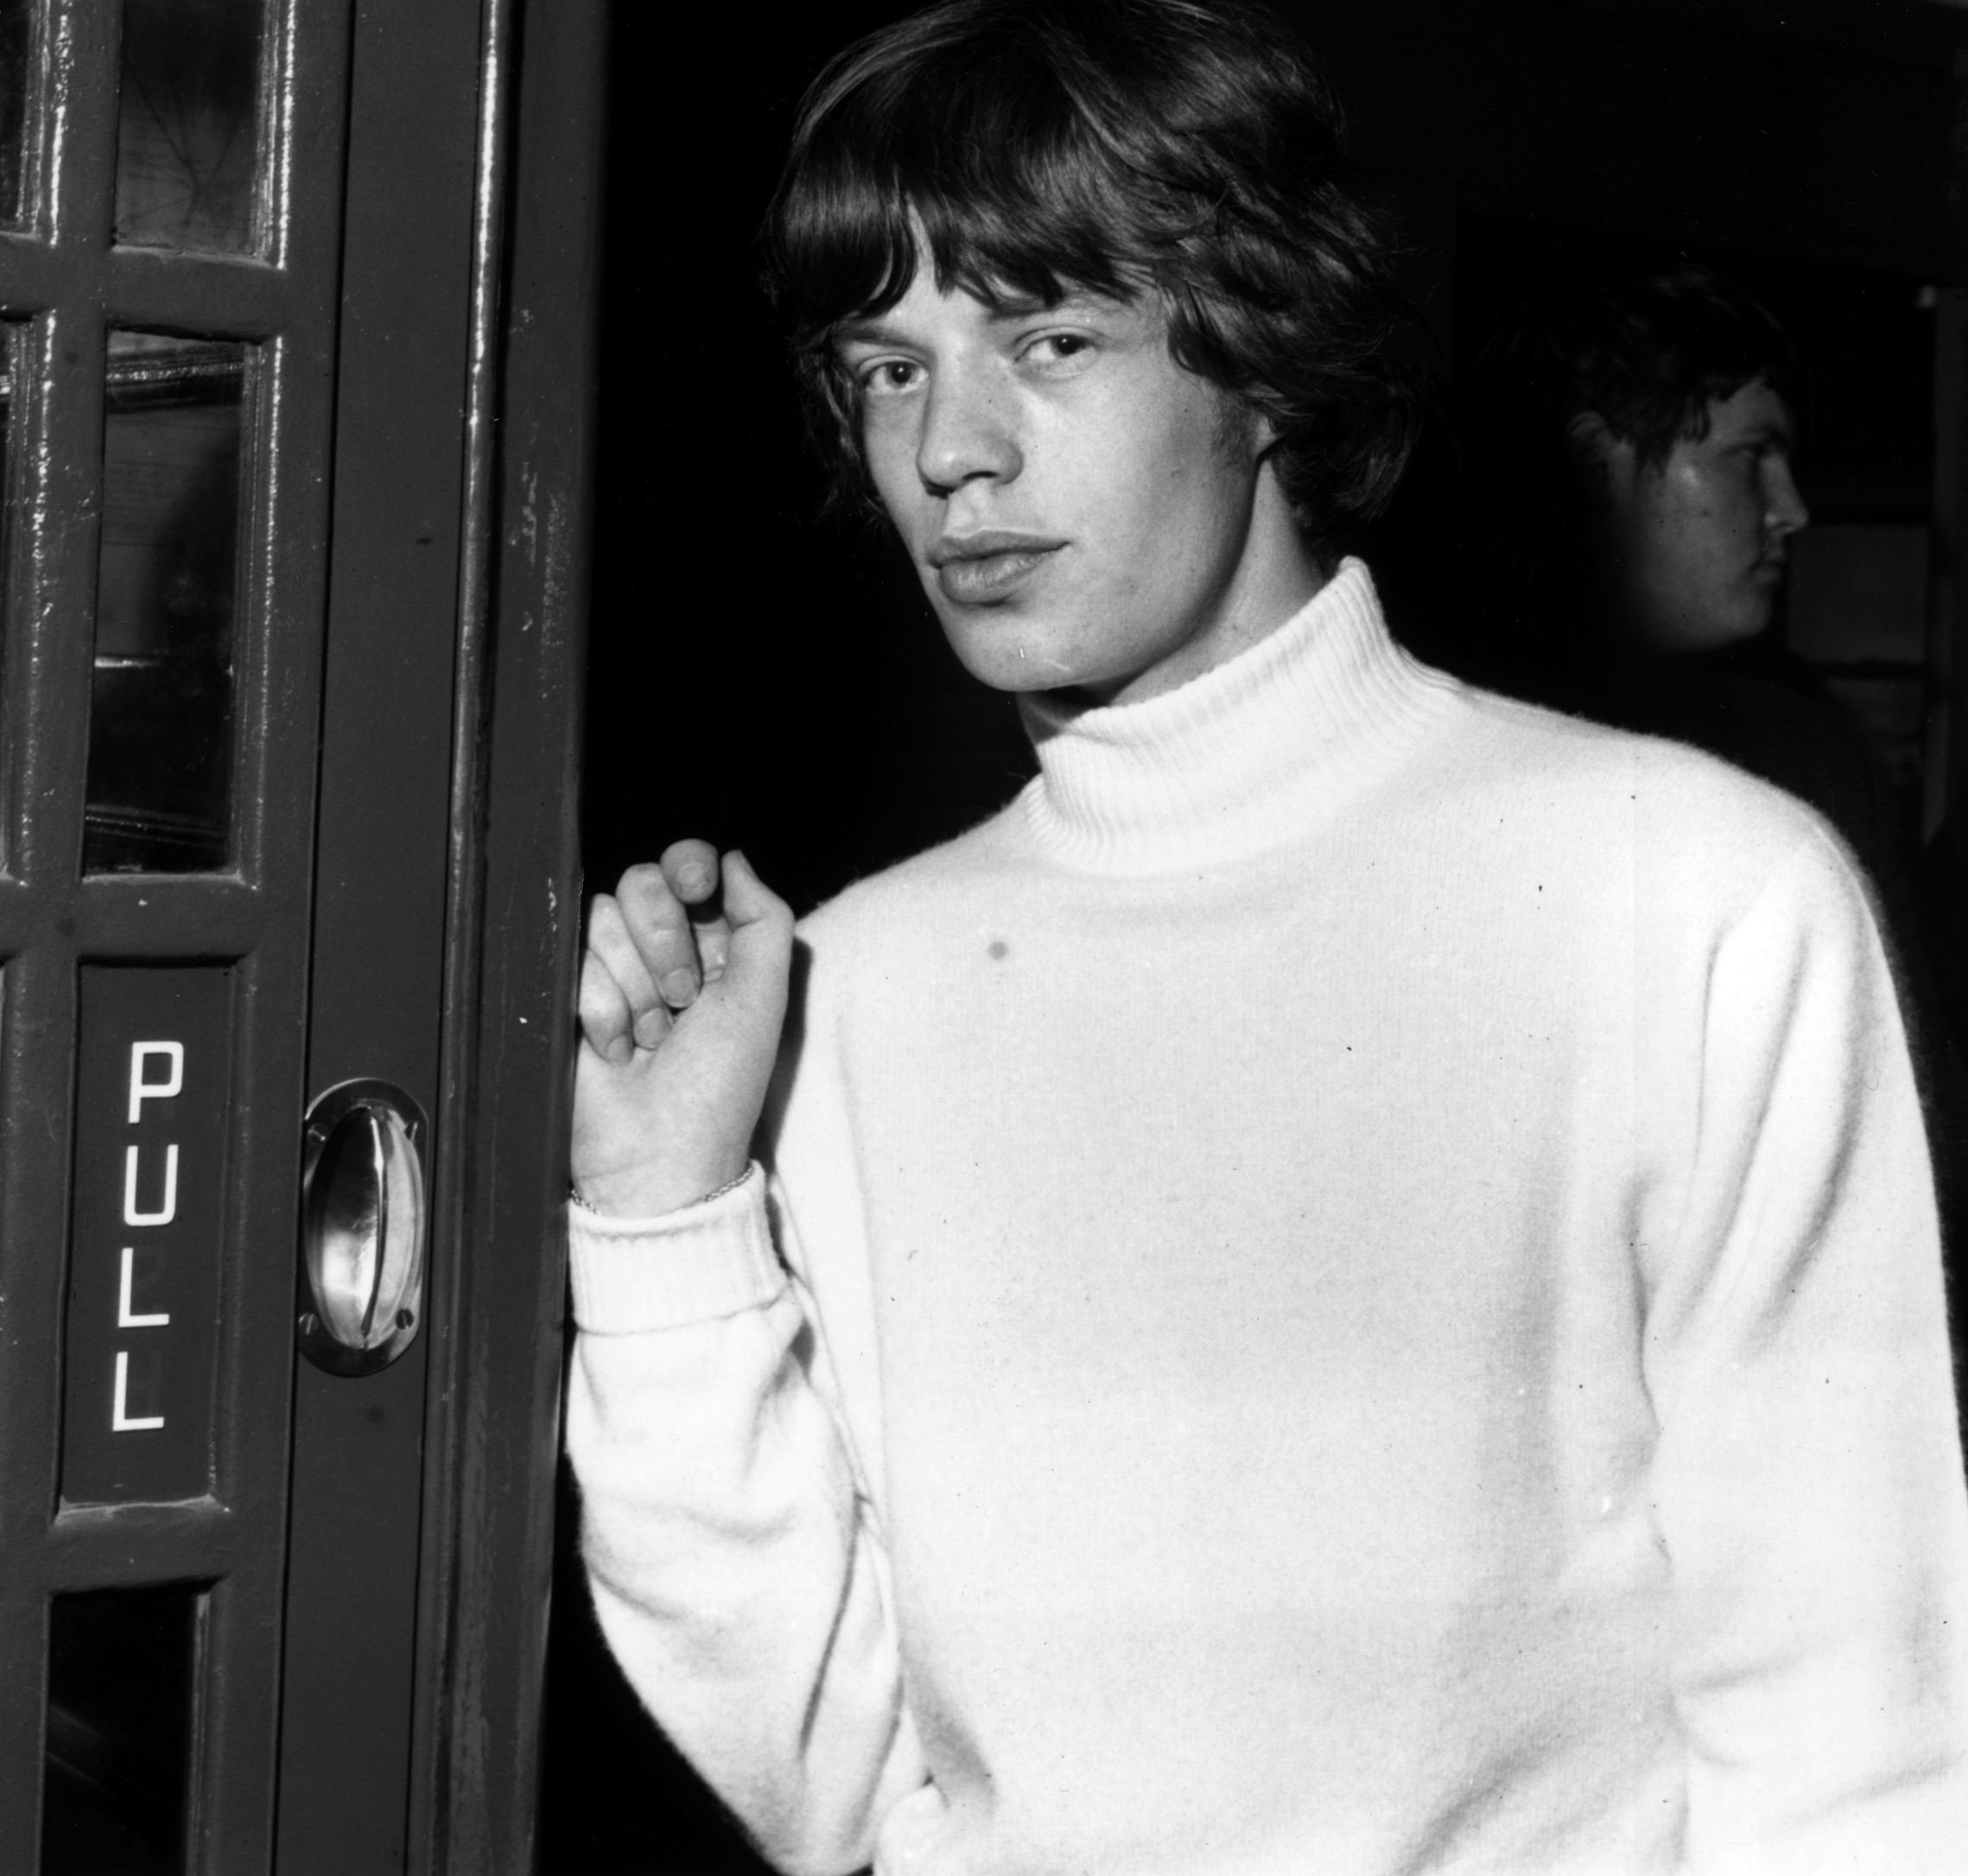 The Rolling Stones' Mick Jagger near a door